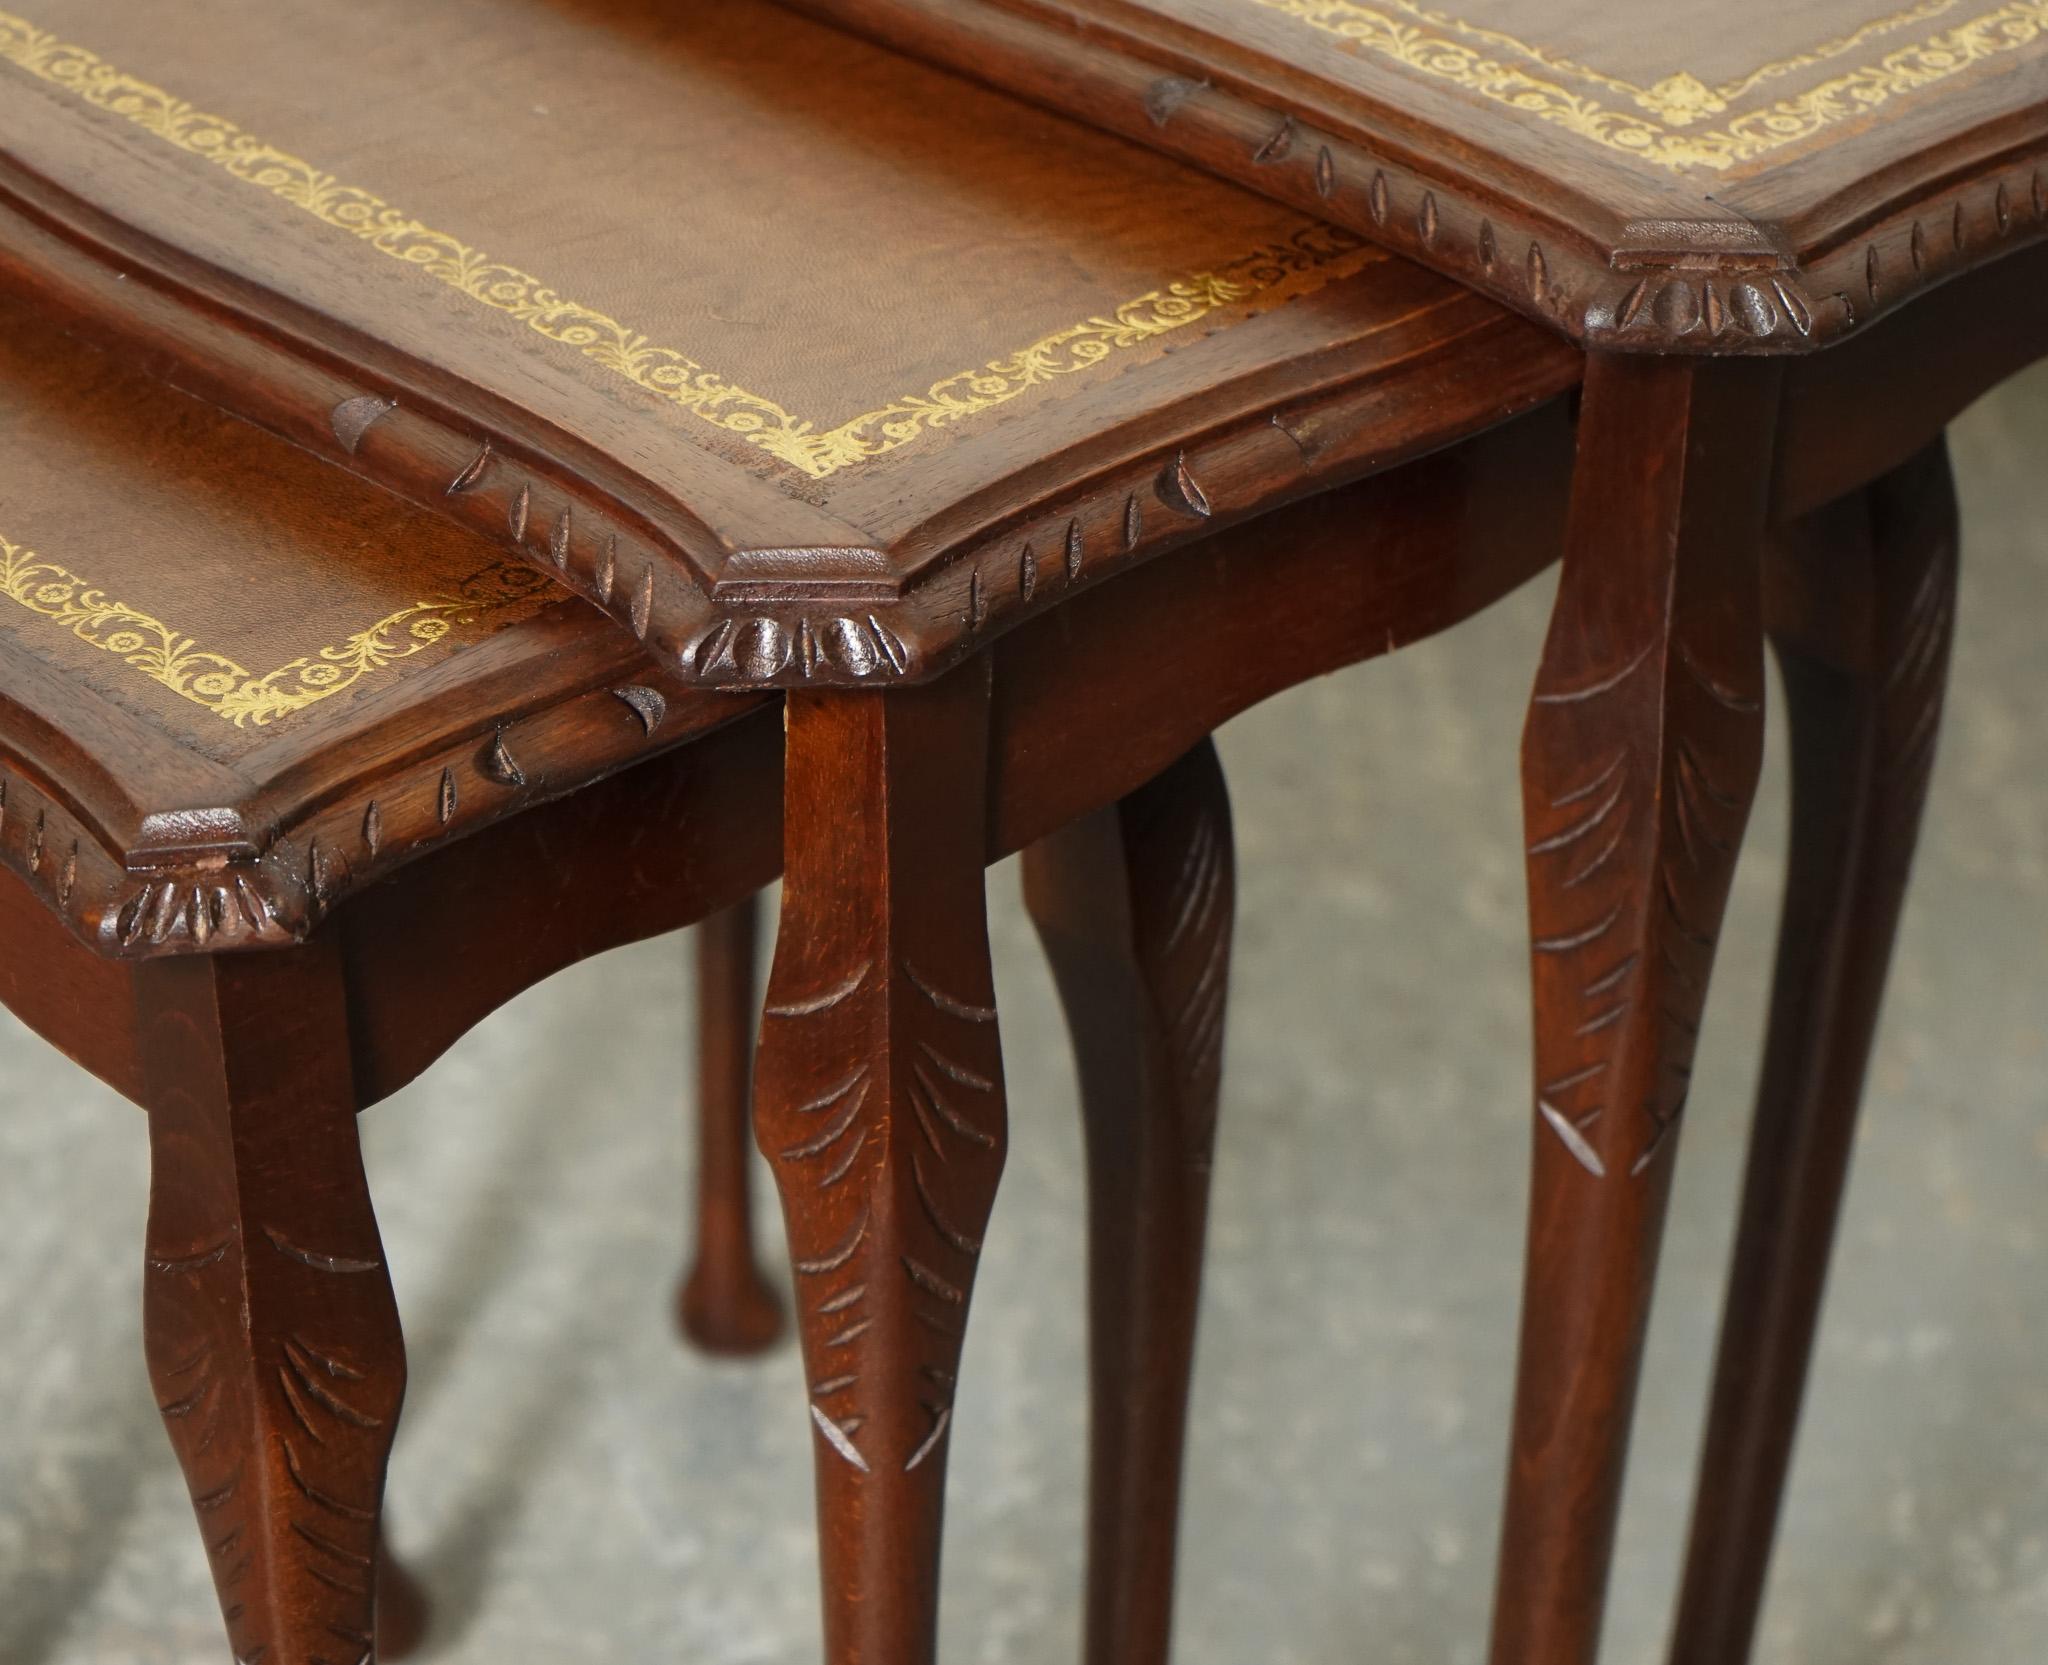 VINTAGE NEST OF TABLES QUEEN ANNE STYLE LEGS WiTH BROWN EMBOSsed LEATHER top en vente 1